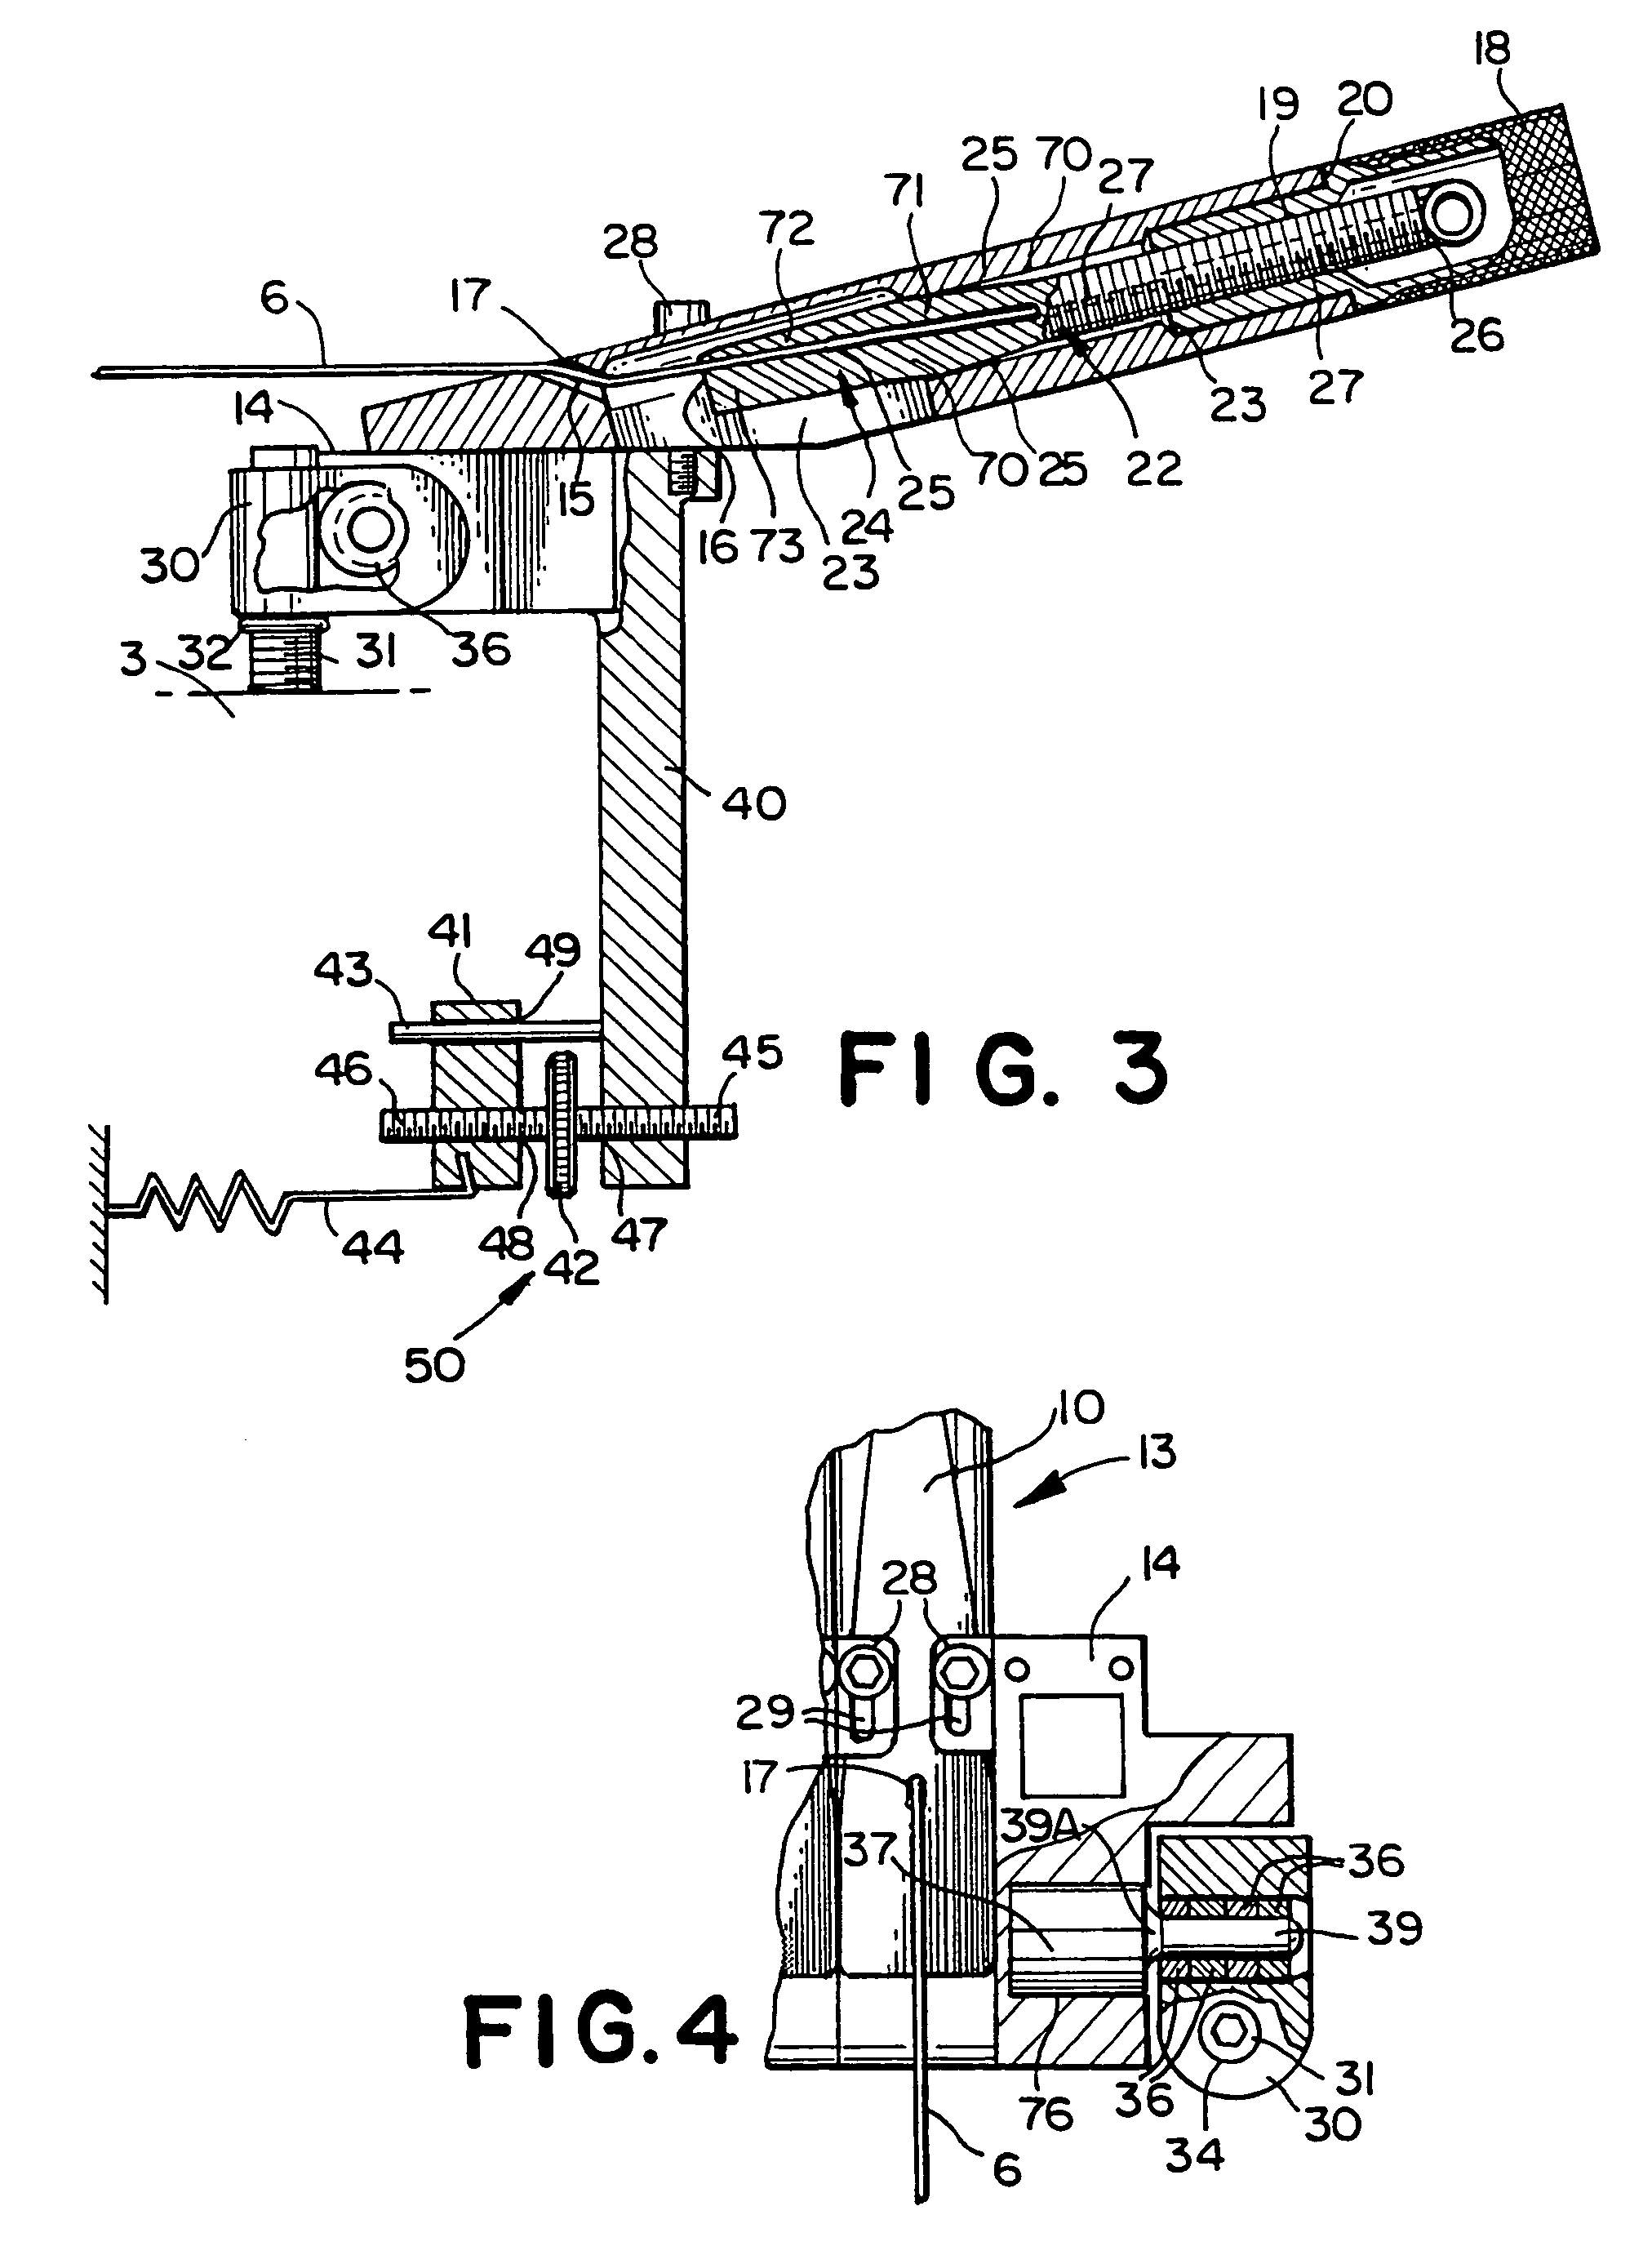 Tuning apparatus for stringed instrument